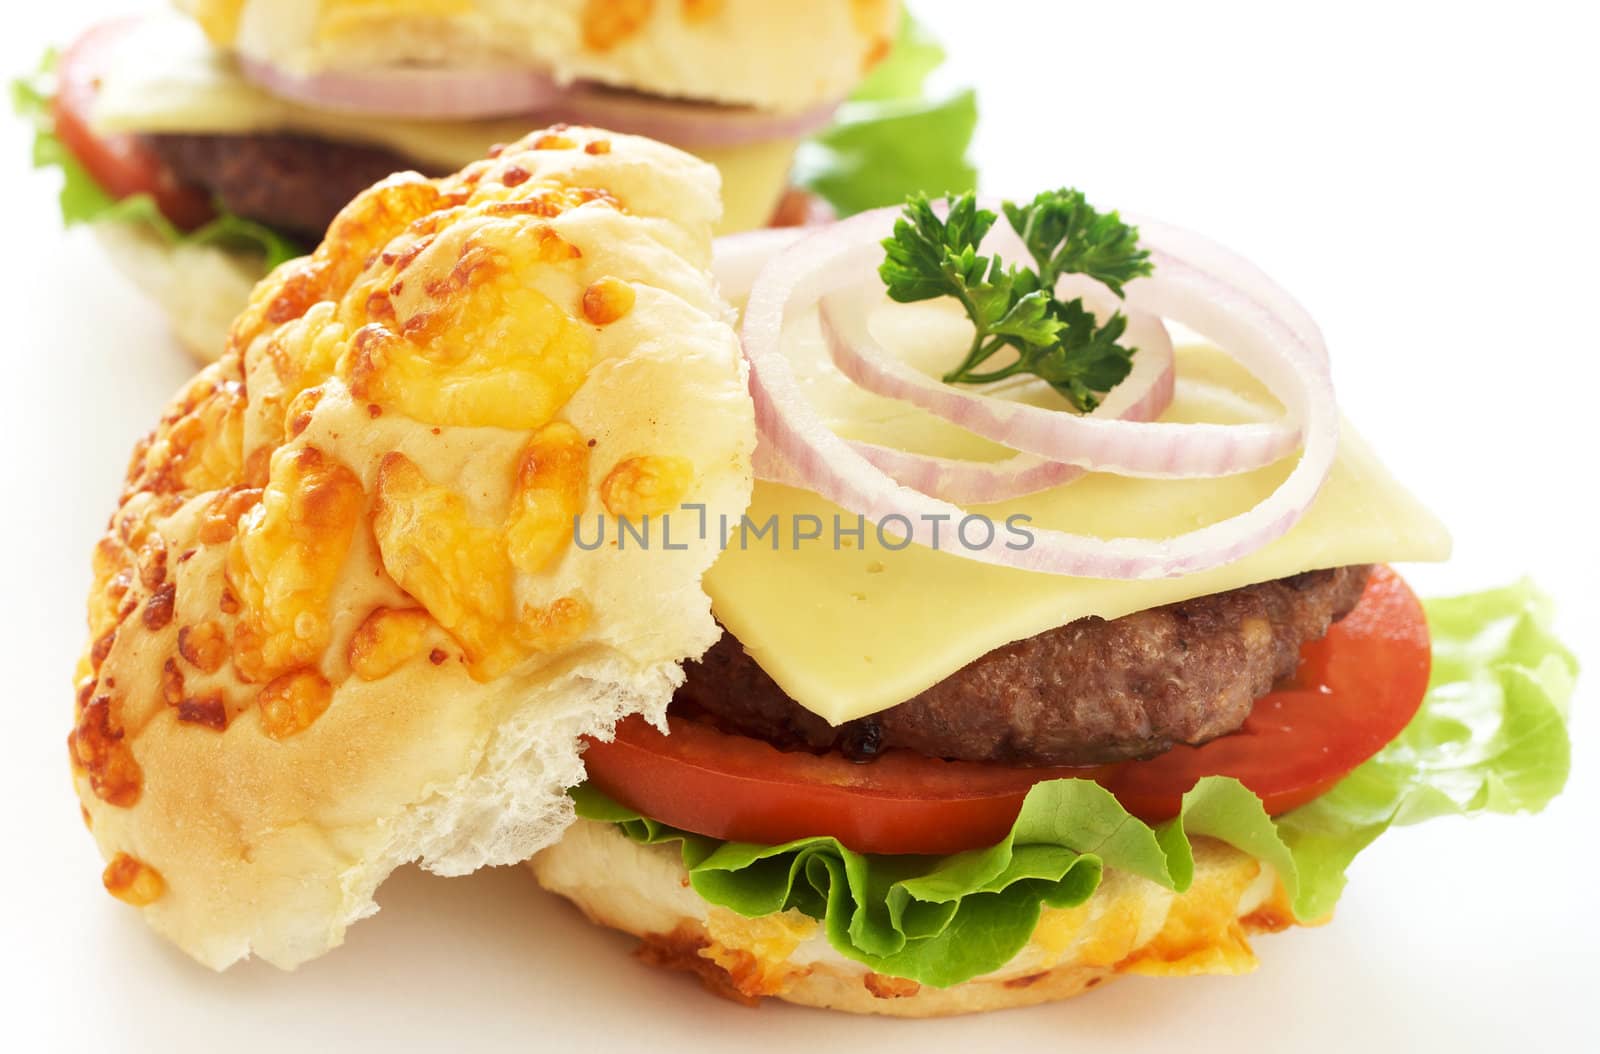 Tasty hamburgers with grilled patty, tomato, cheese and lettuce on white background